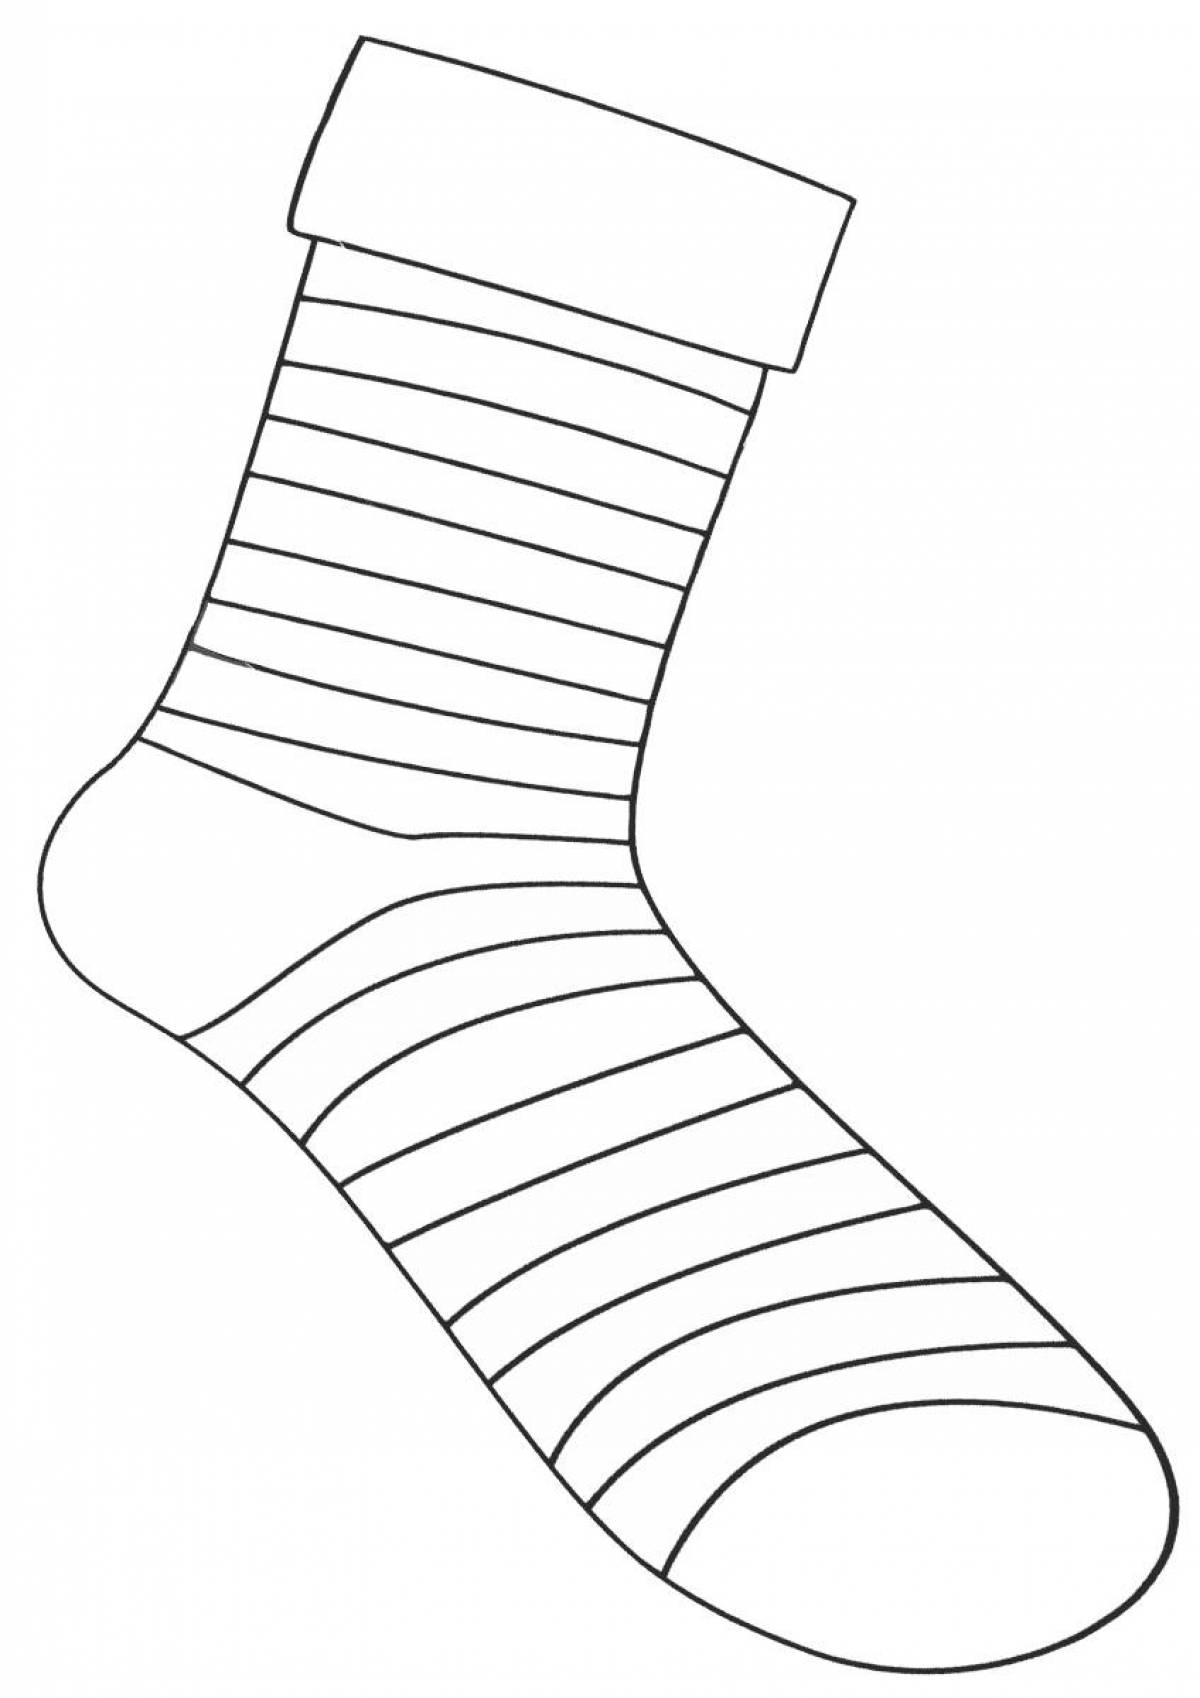 Playful socks coloring page